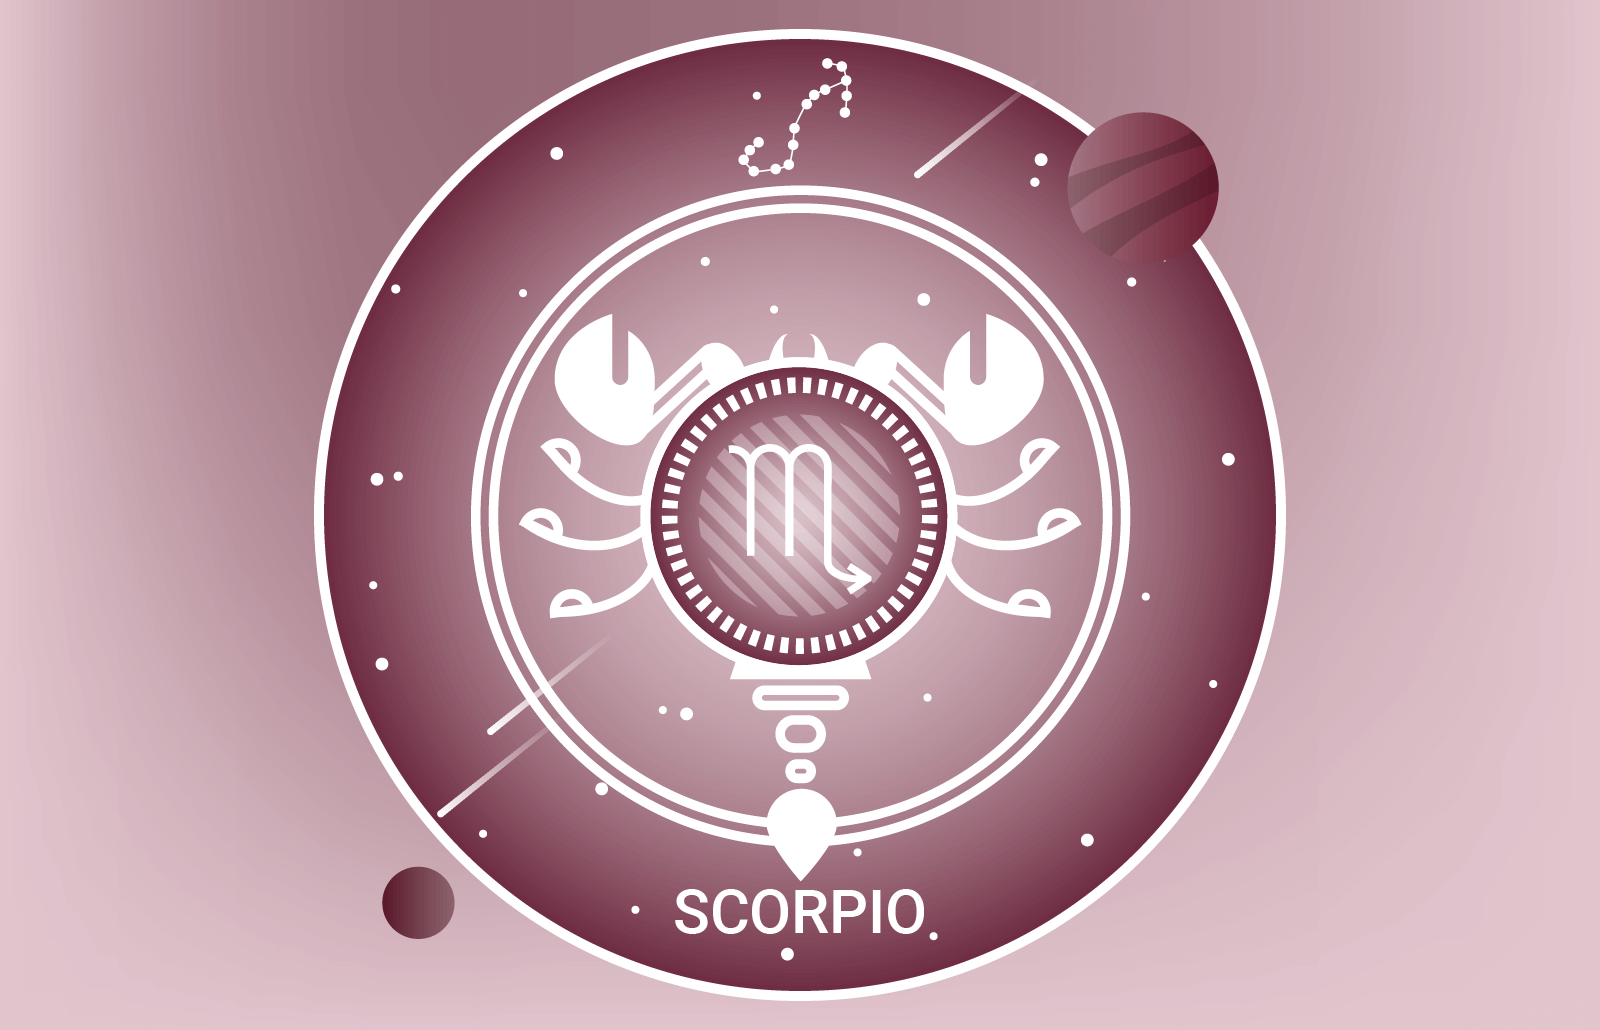 SCORPIO Horoscope: Astrological Prediction for Career, Job and Business